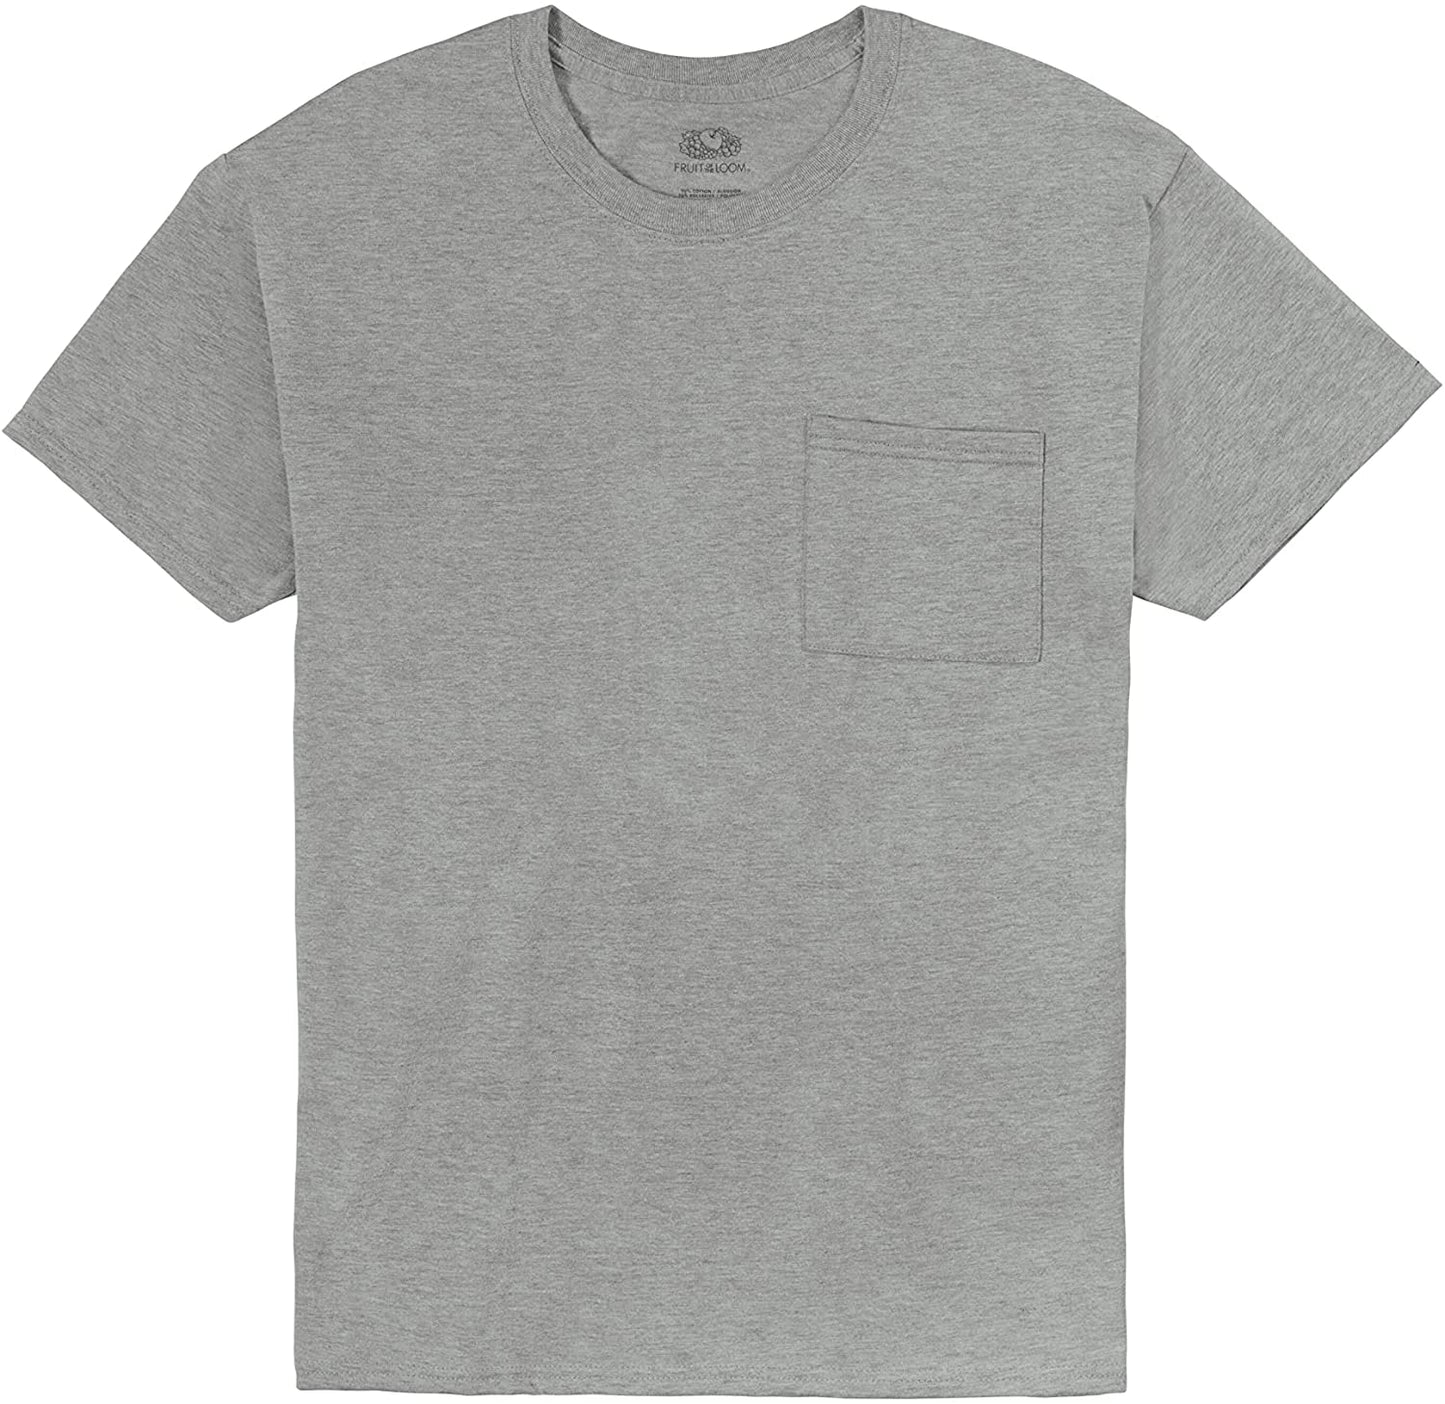 Fruit of the Loom Men's Eversoft Cotton T-Shirts (Big & Tall Sizes)